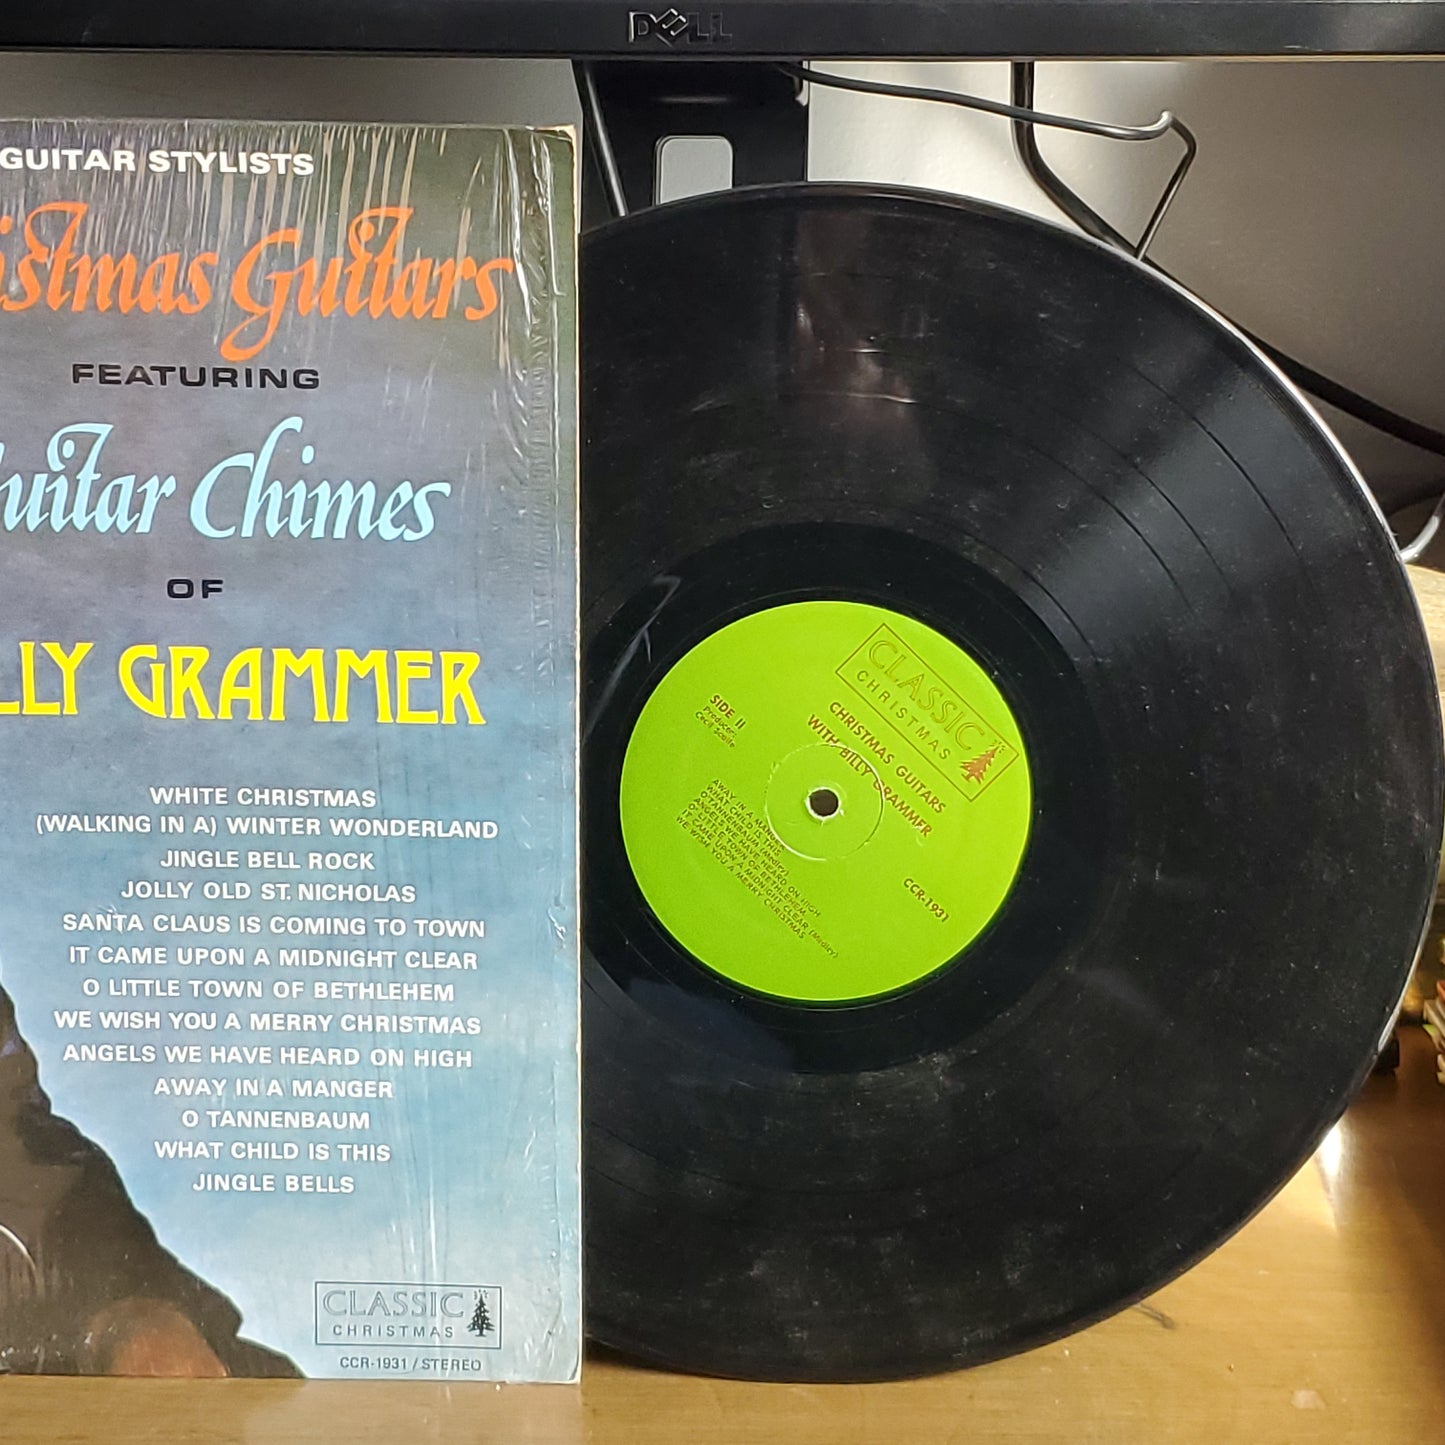 Christmas Guitars Featuring Guitar Chimes of Billy Grammer By Classic Records 1977